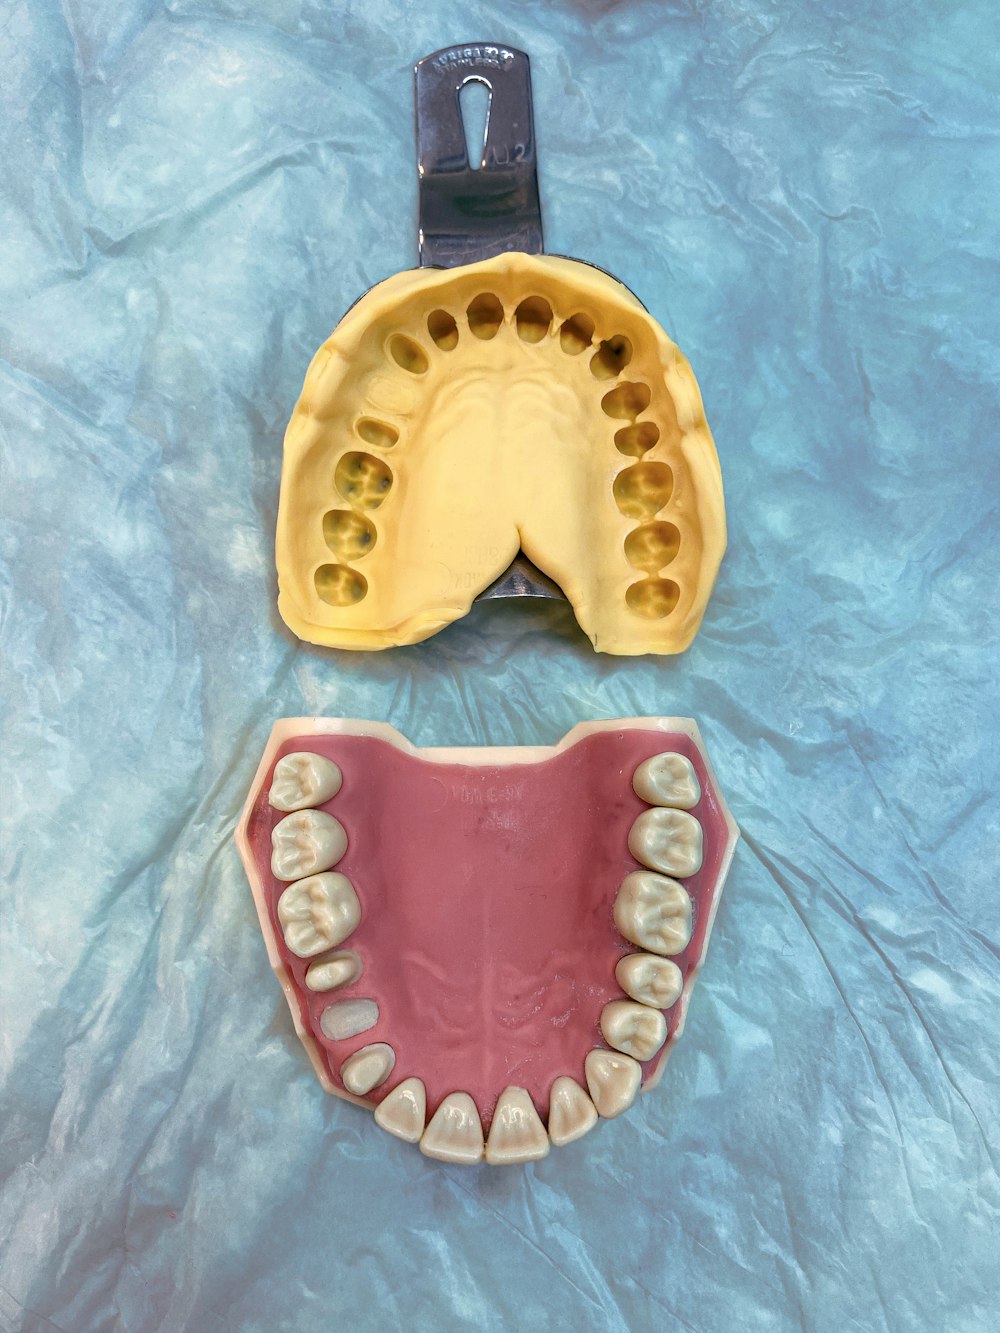 a plastic model of a mouth and a plastic model of a mouth